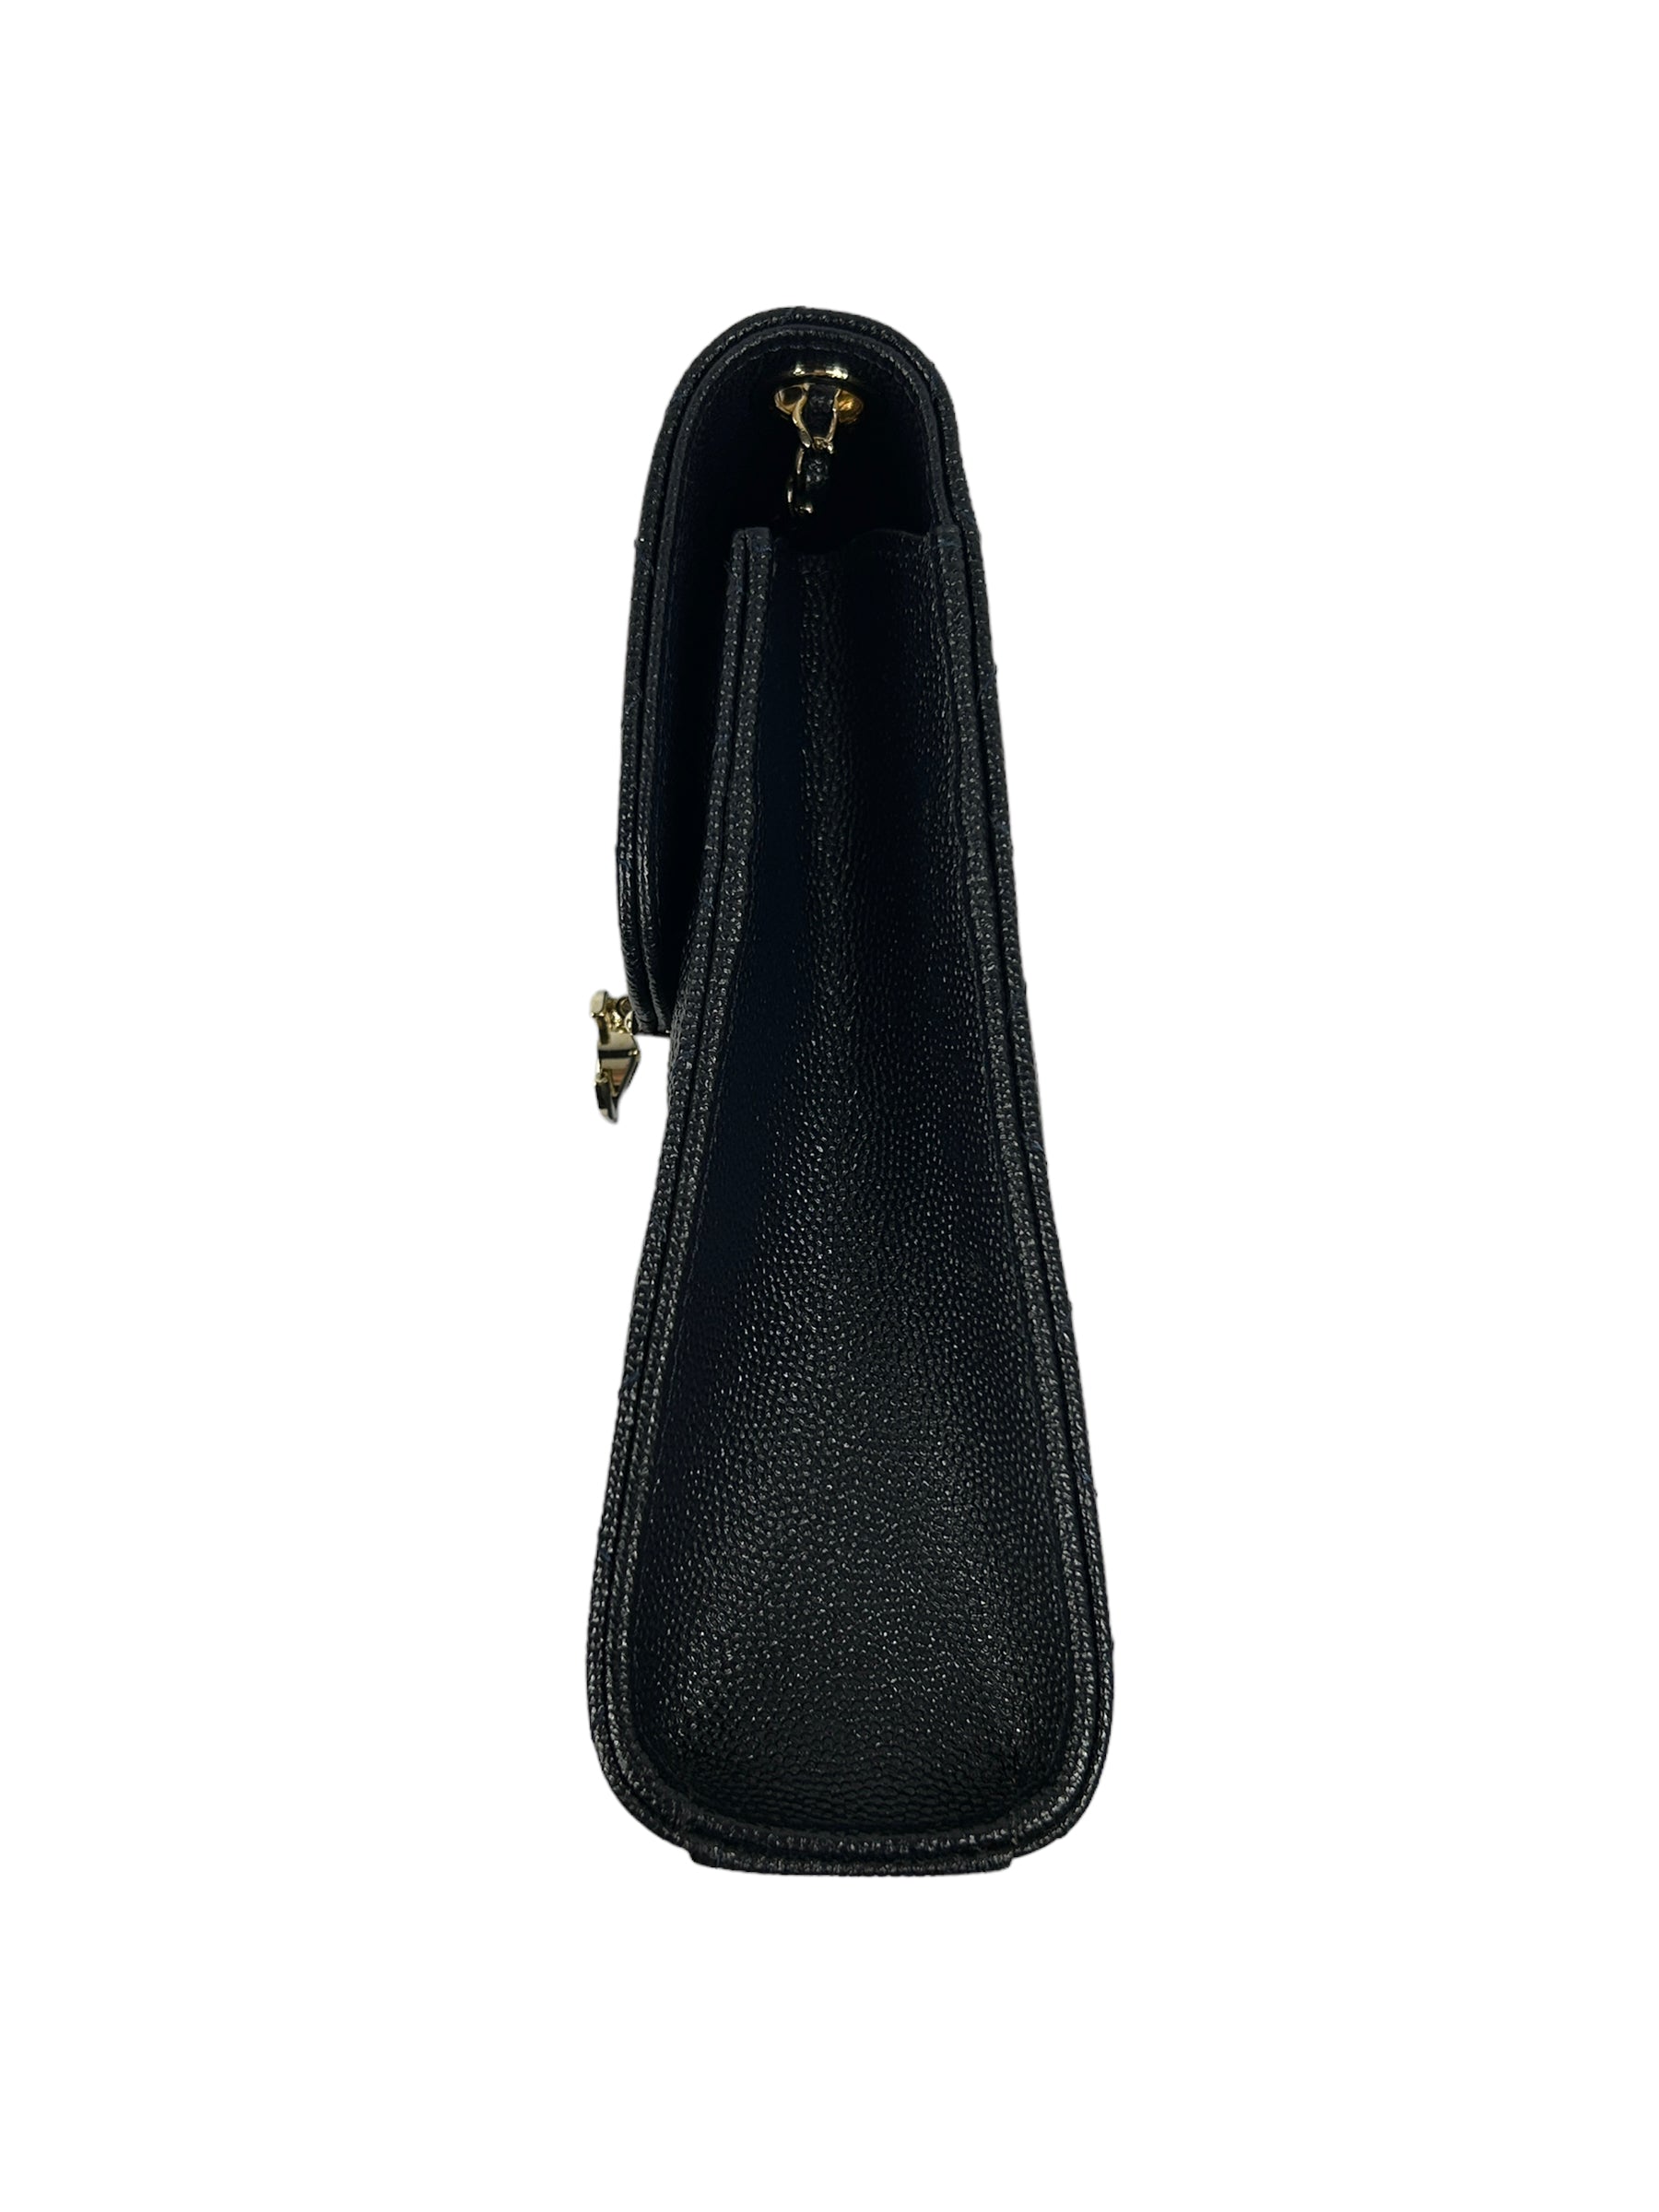 Navy Quilted Caviar Leather Golden Class Phone Holder w/LGHW